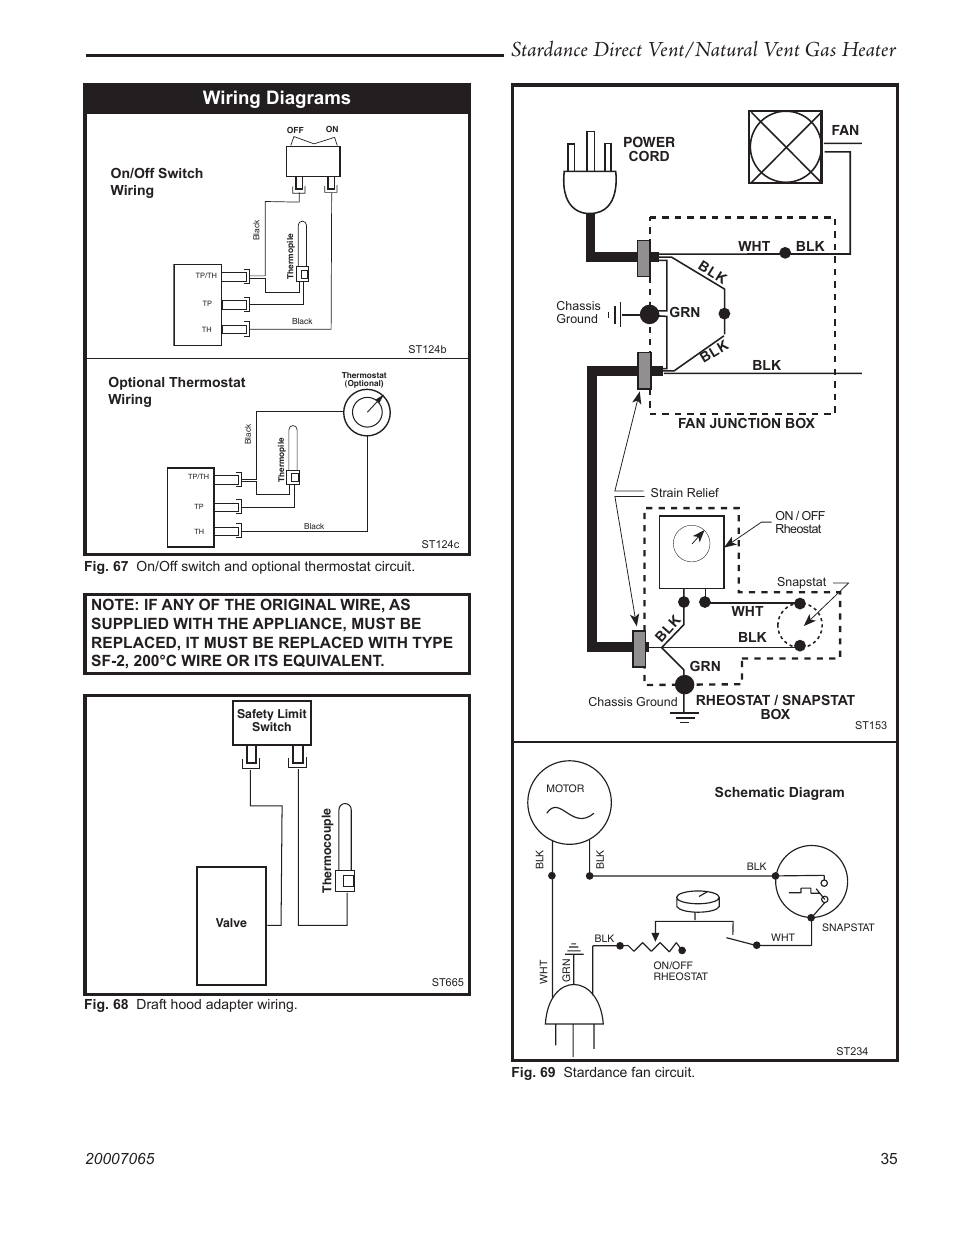 Wiring Diagram For Vent A Hood